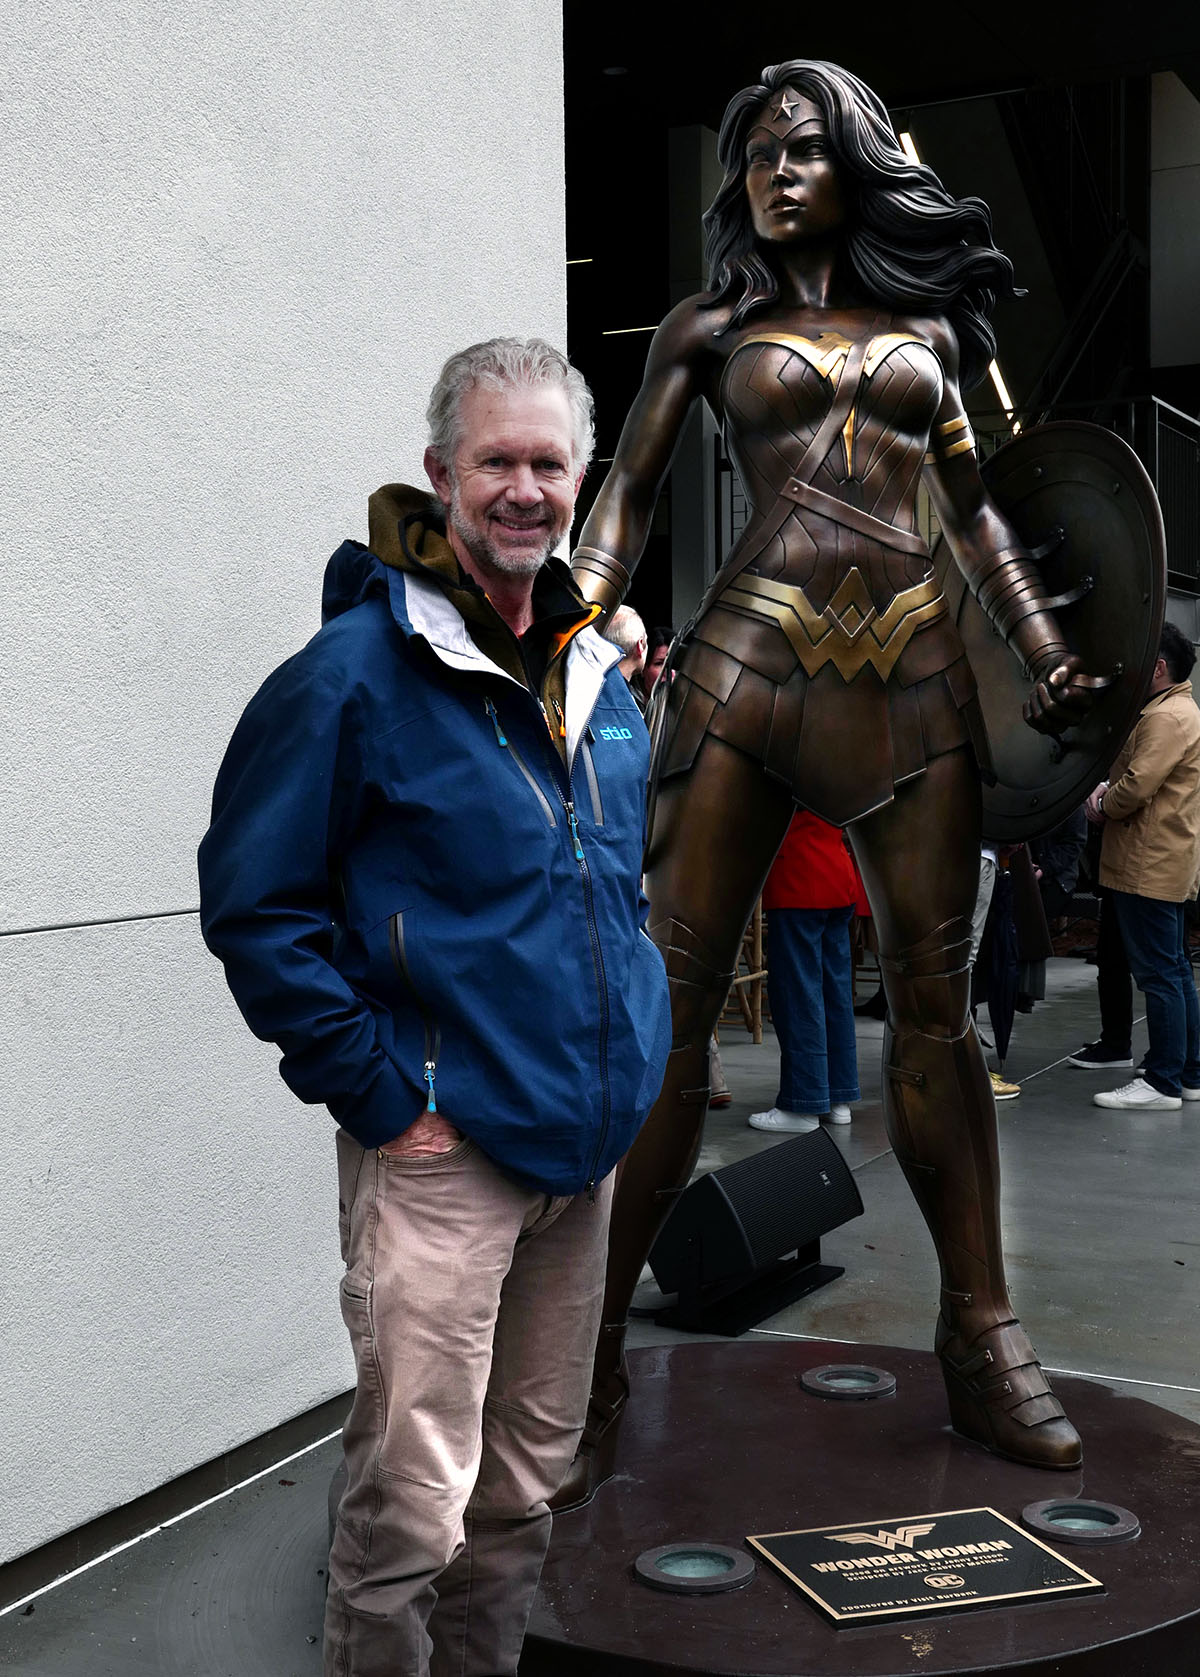 Unveiled on Wednesday, the magnificent seven-and-a-half-foot-tall bronze statue of Wonder Woman stands as a testament to her enduring legacy. This awe-inspiring 600-pound statue was meticulously crafted by skilled artisans at Burbank's renowned American Fine Arts Foundry and Fabrication.